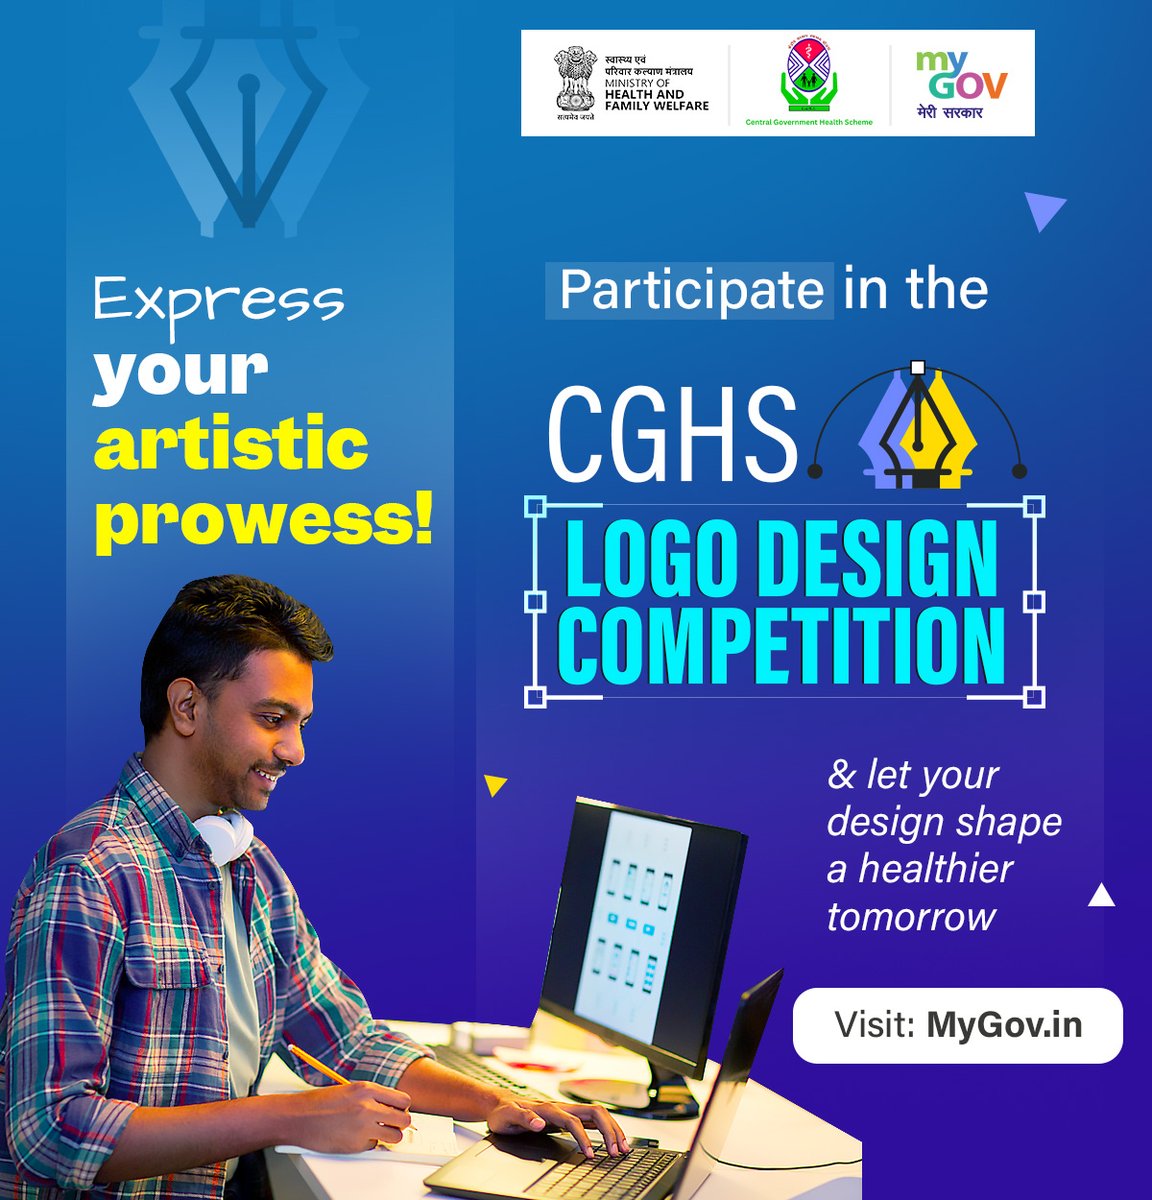 Designers, this is your chance to shine! 

Join the CGHS Logo Design Competition and shape the future of India's healthcare identity. Show off your creativity and make a lasting impact. 

Visit: mygov.in/task/cghs-logo…

#DesignCompetition #Healthcare

@MoHFW_INDIA